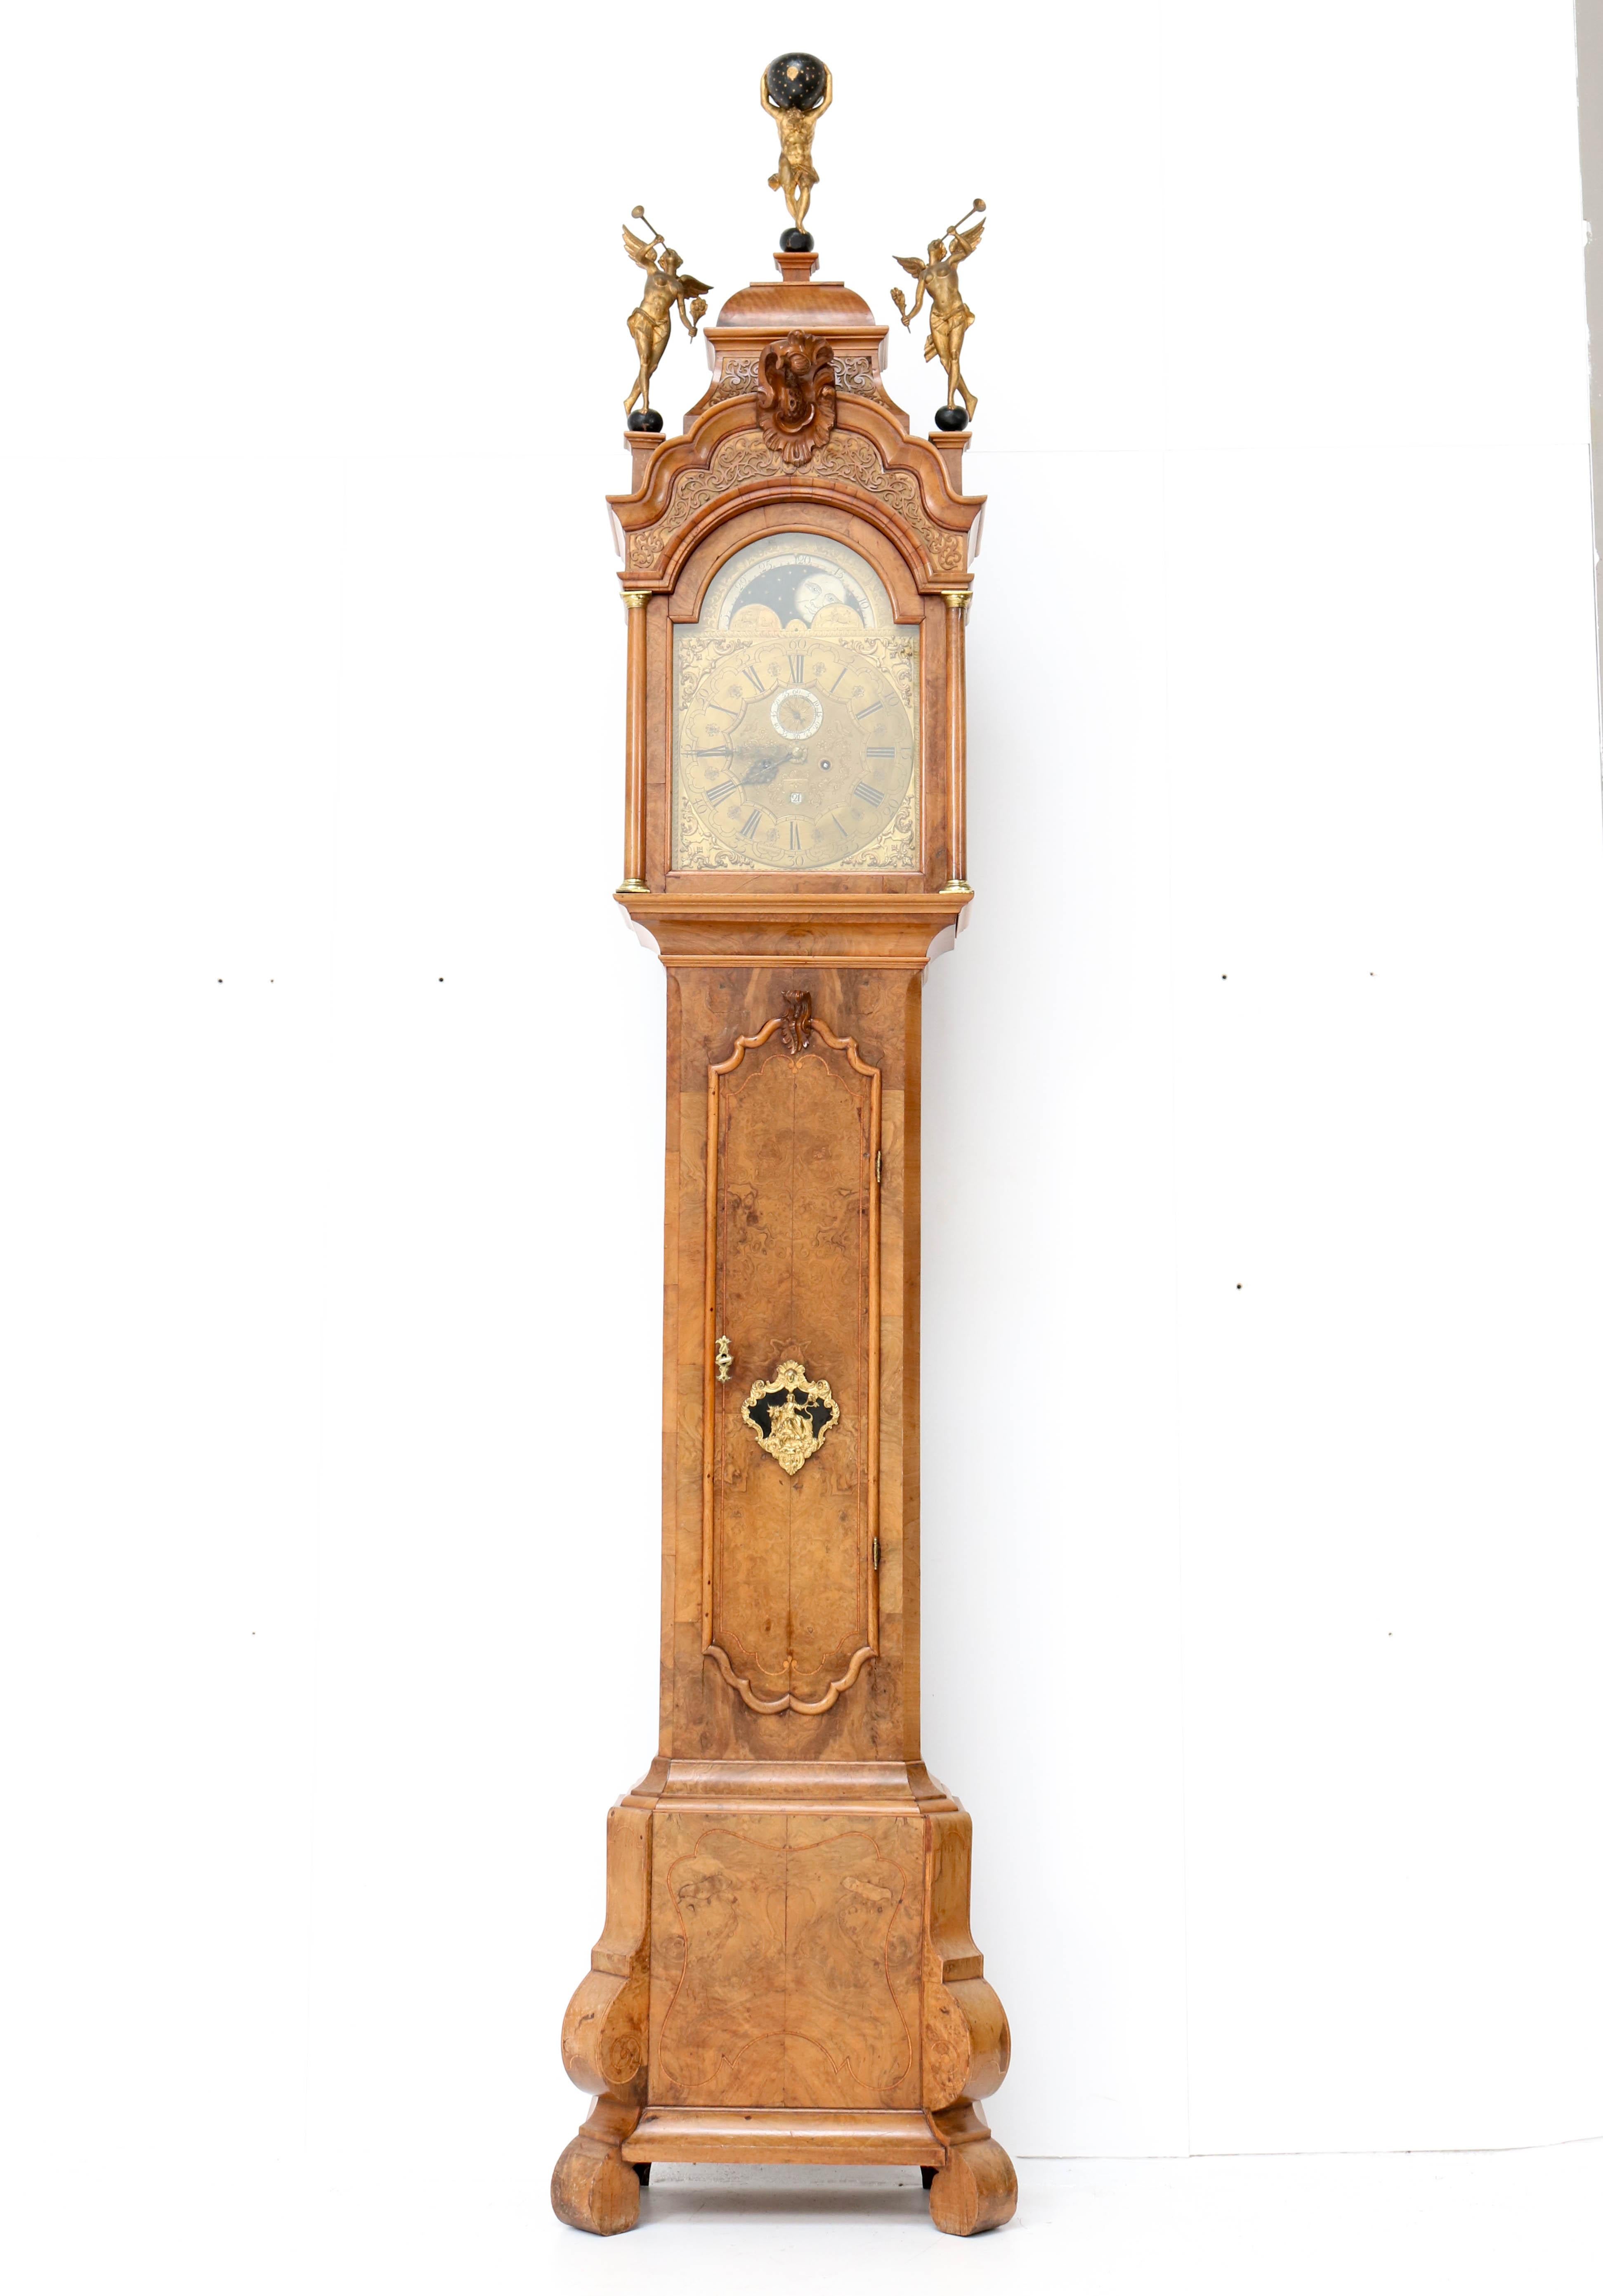 Magnificent and rare Dutch longcase or grandfather clock.
This is a so called Amsterdams Staand Horloge.
Signed: Anthony Auwers 's Hertogen Bosch but made in Amsterdam.
Striking Dutch design from the 18th century.
Walnut bomb base with three